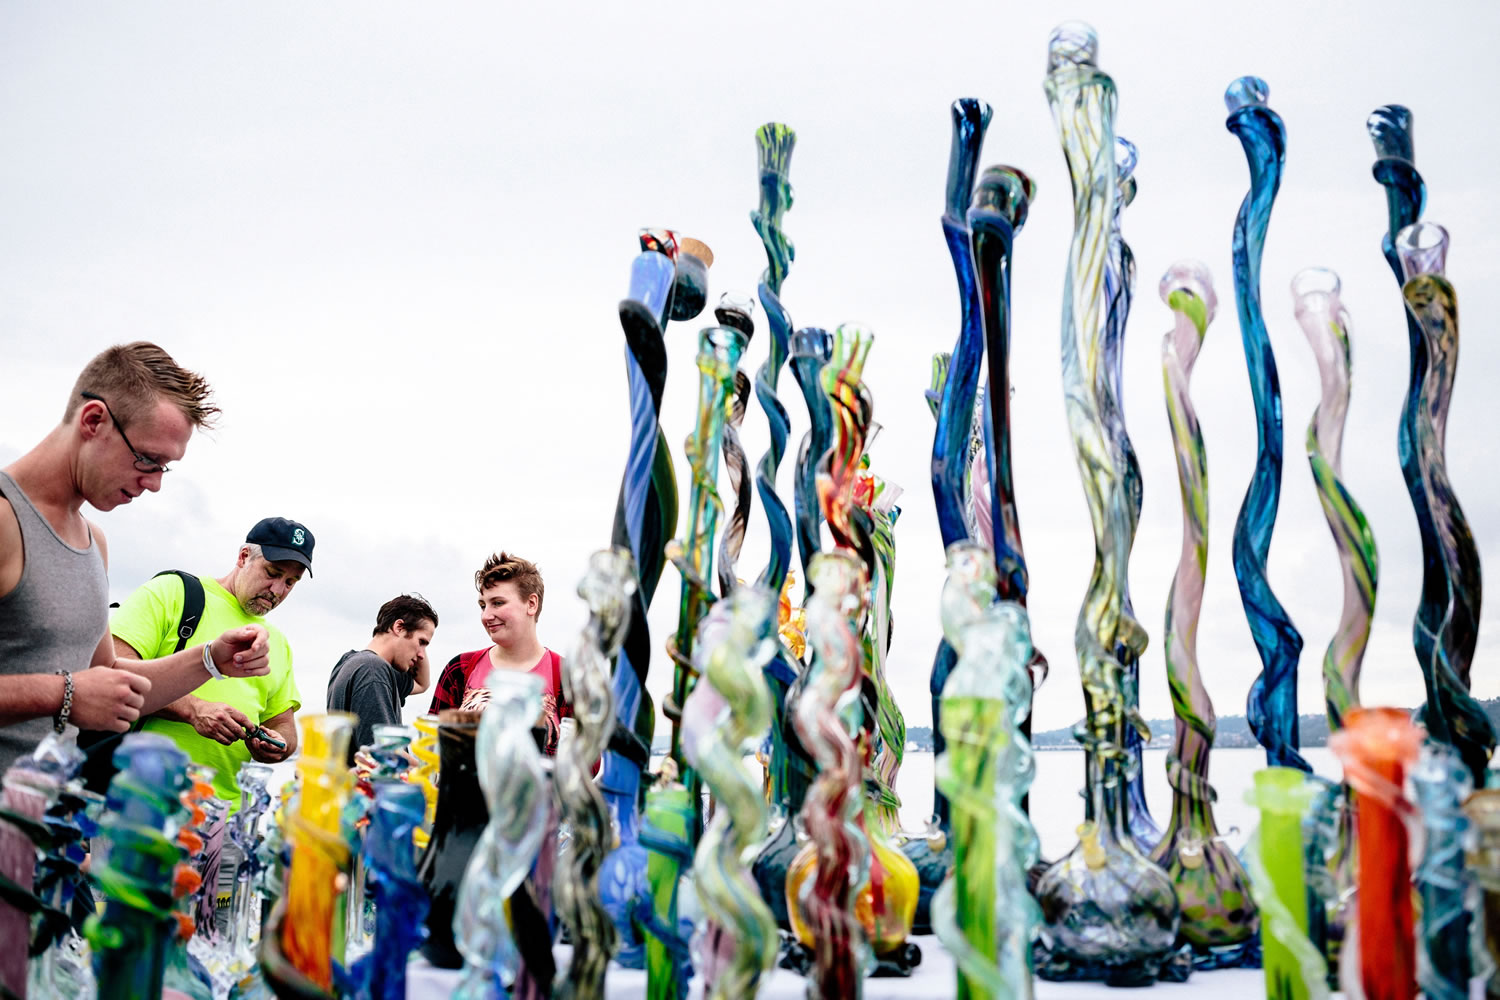 Attendees peruse a myriad of pipes, bongs and other smoking paraphernalia on the first of three days of Hempfest, Seattle's annual gathering to advocate the decriminalization of marijuana Friday at Myrtle Edwards Park on the Seattle waterfront in Seattle, Washington.